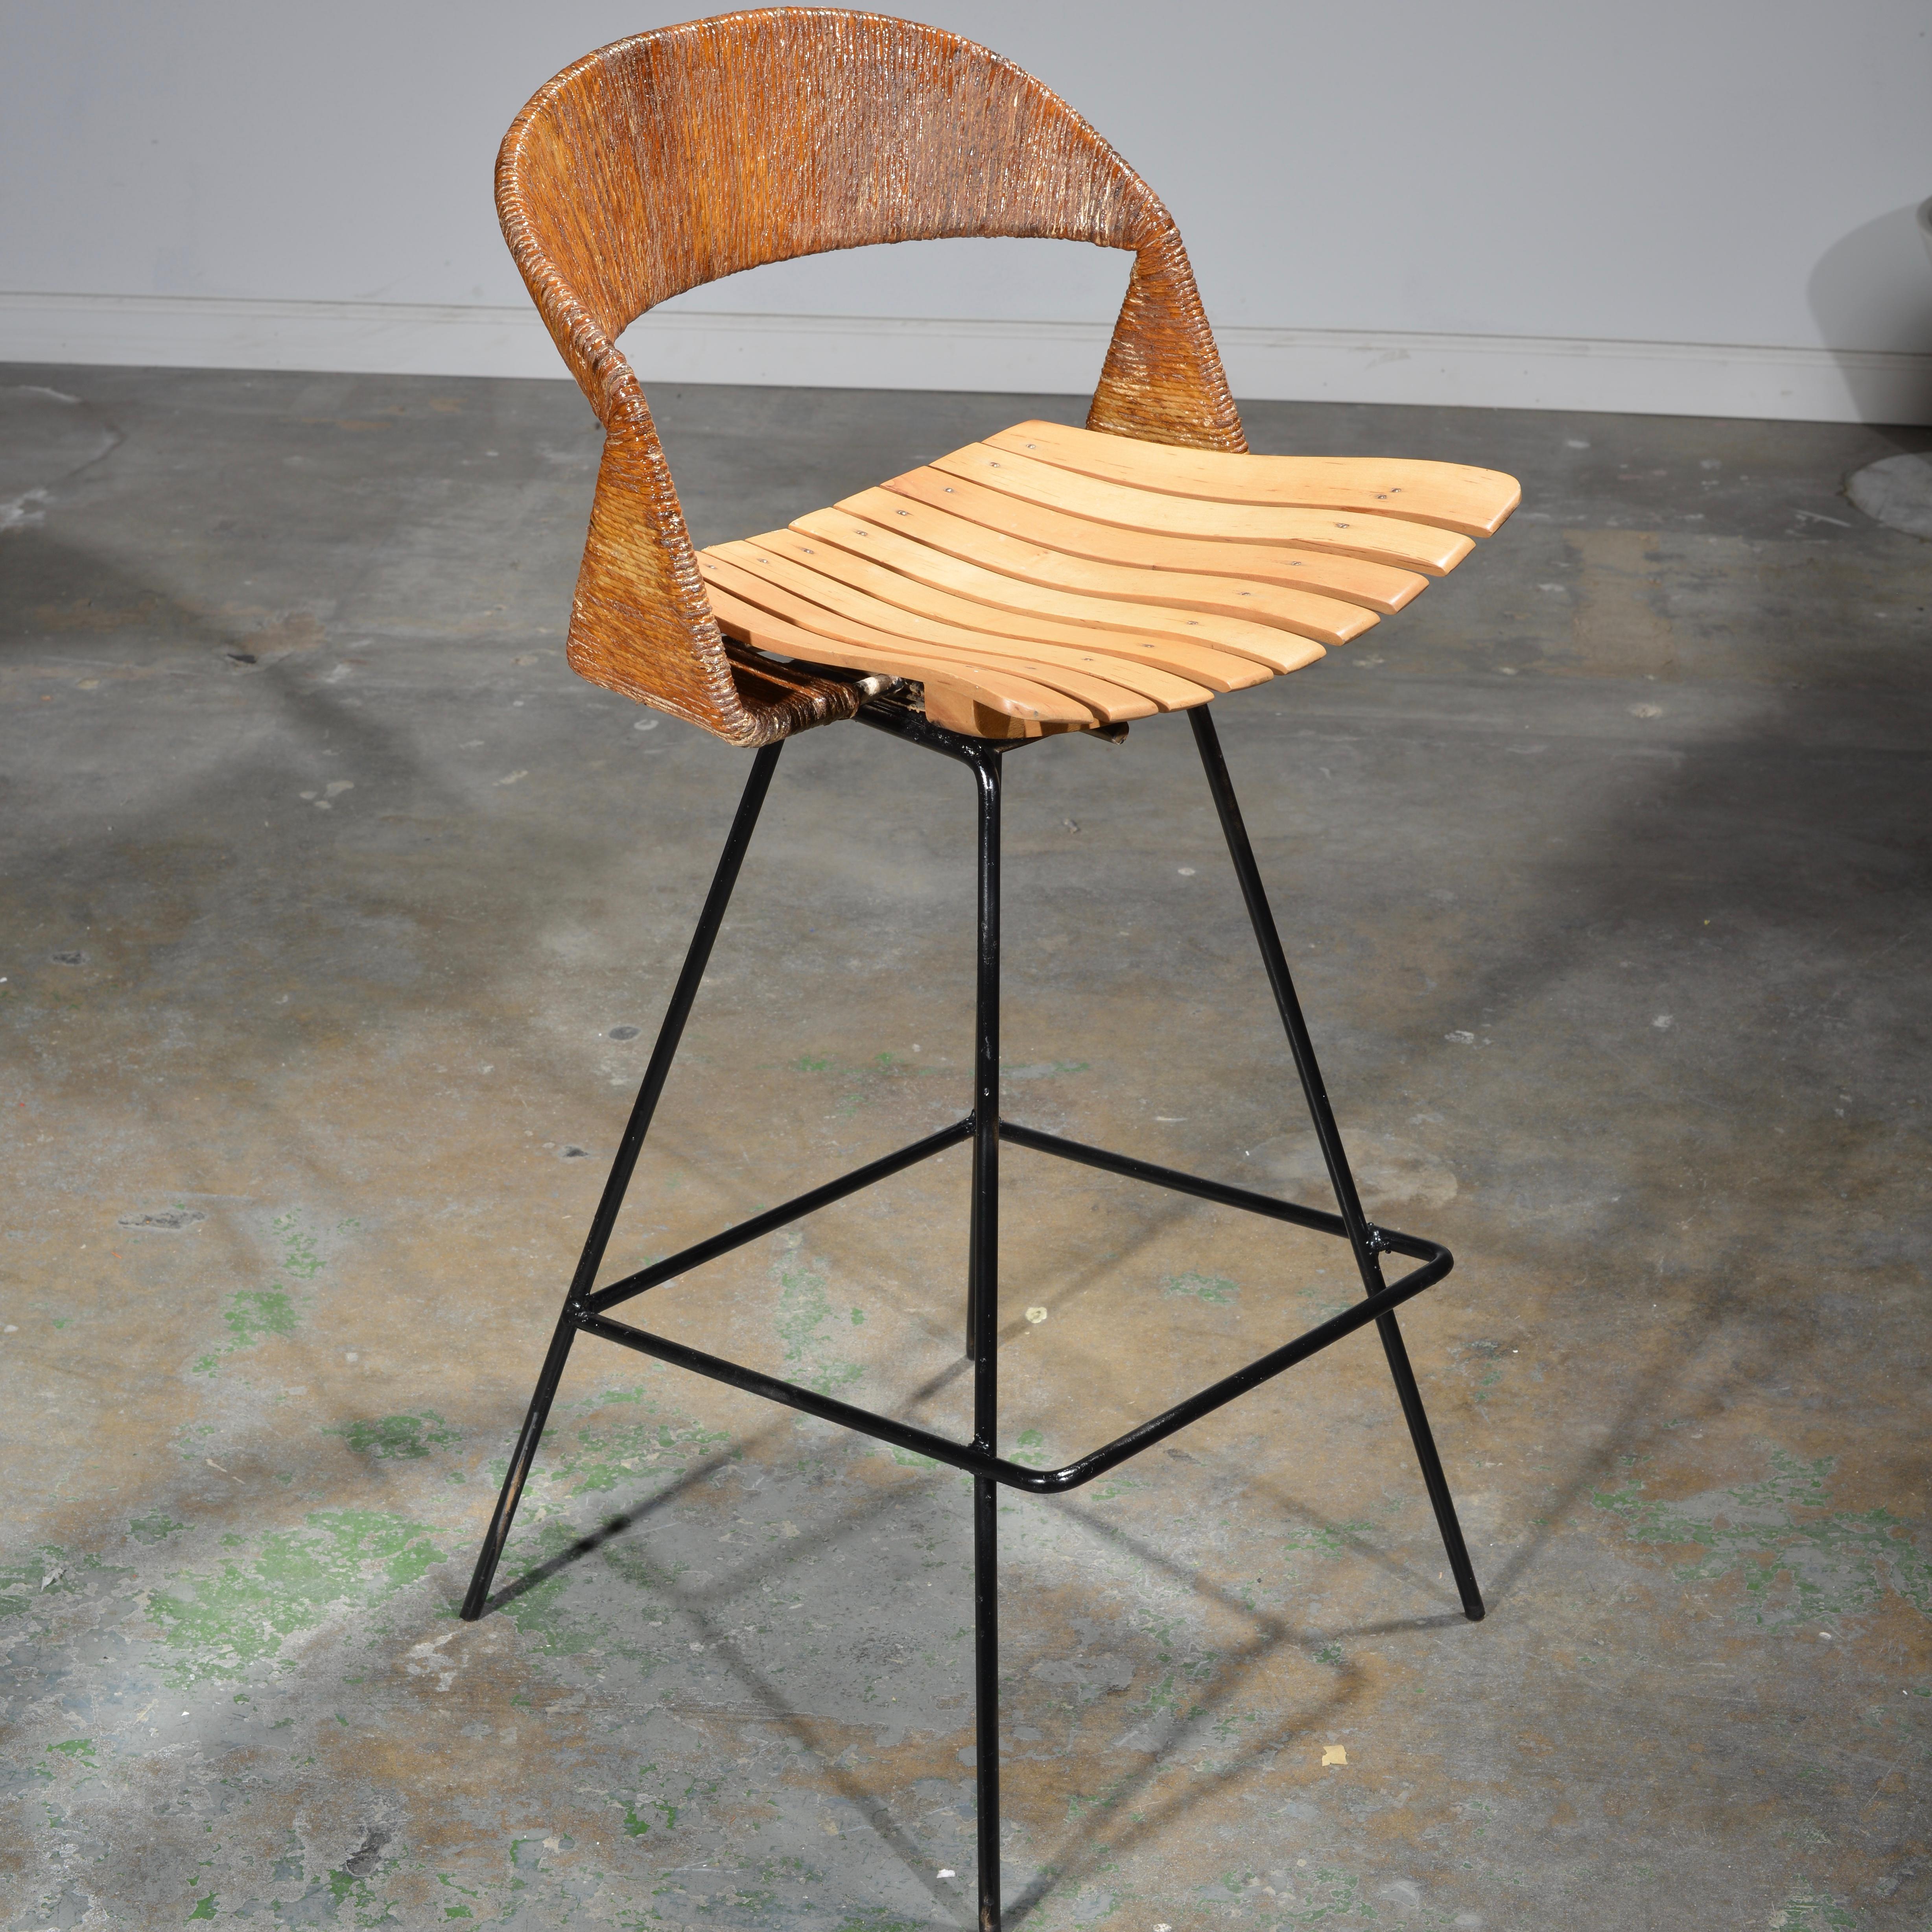 We have 2 of these rare rotating, counter height stools by Arthur Umanoff. These stools are thoughtfully crafted with a steel frame, birch seat, and jute wrapped around the seat back, all materials quite typical for Umanoff’s designs. 

Arthur